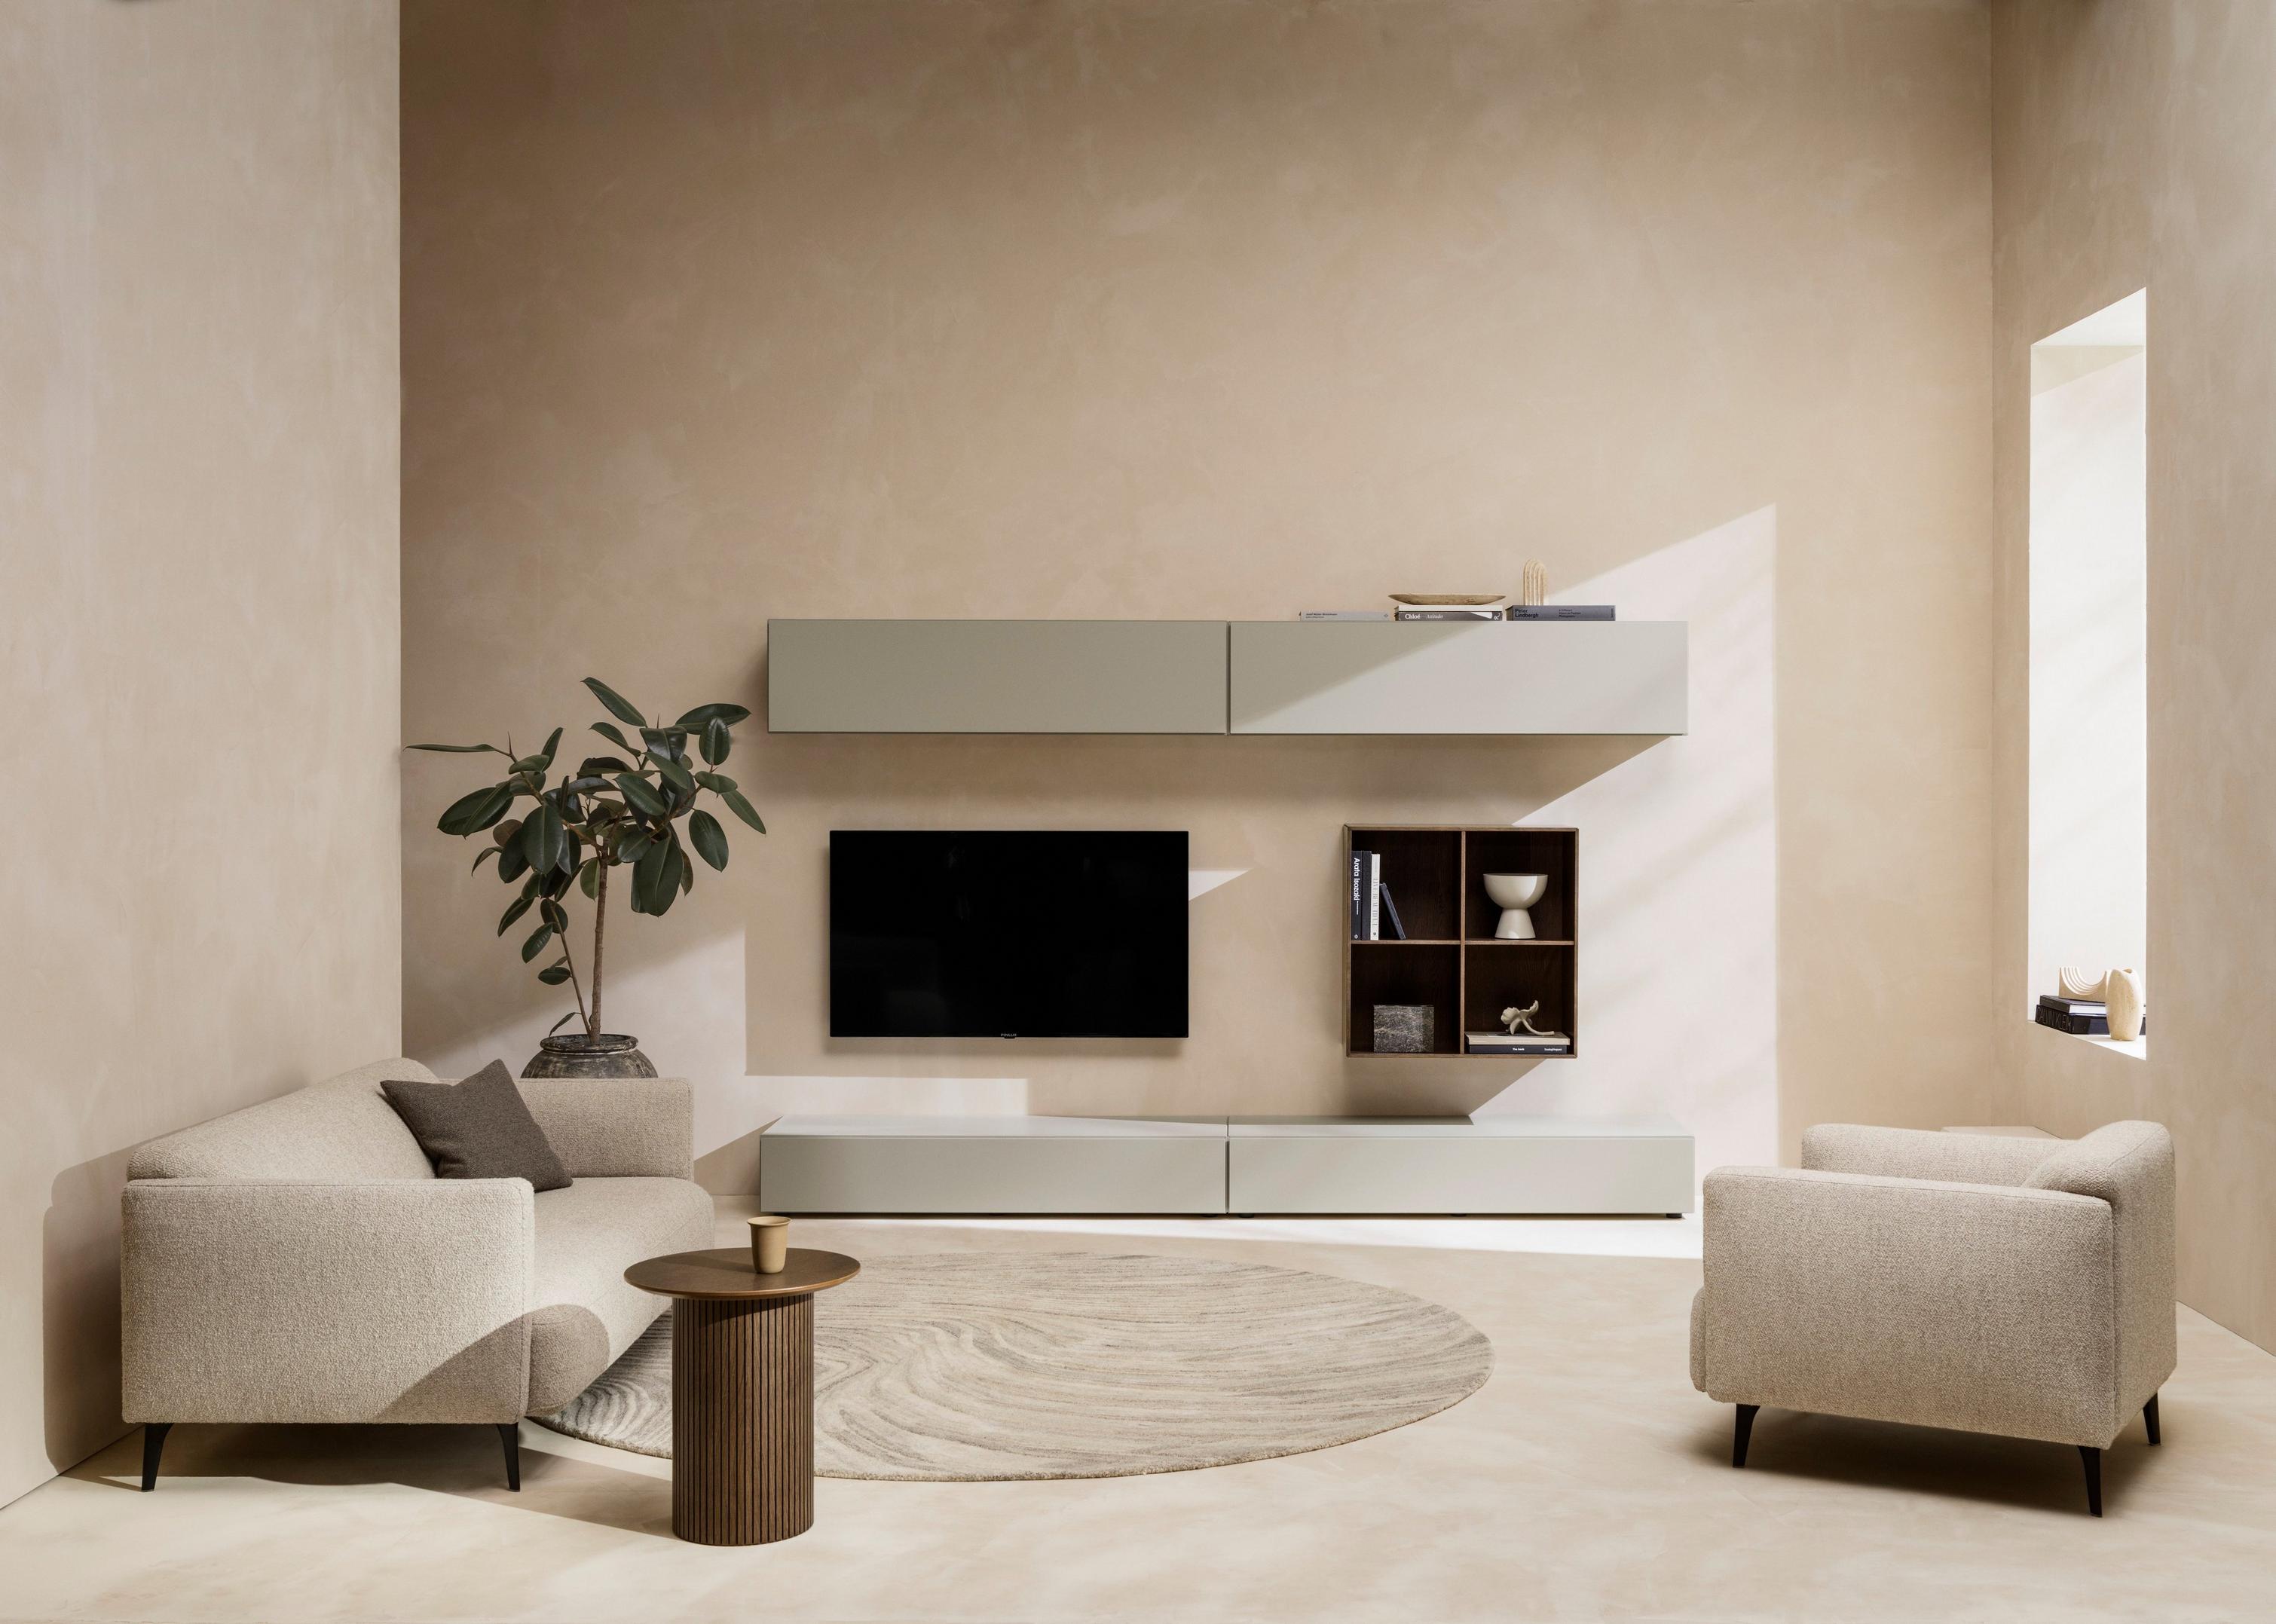 Relaxing living room with neutral color palette featuring the Santiago round coffee table.